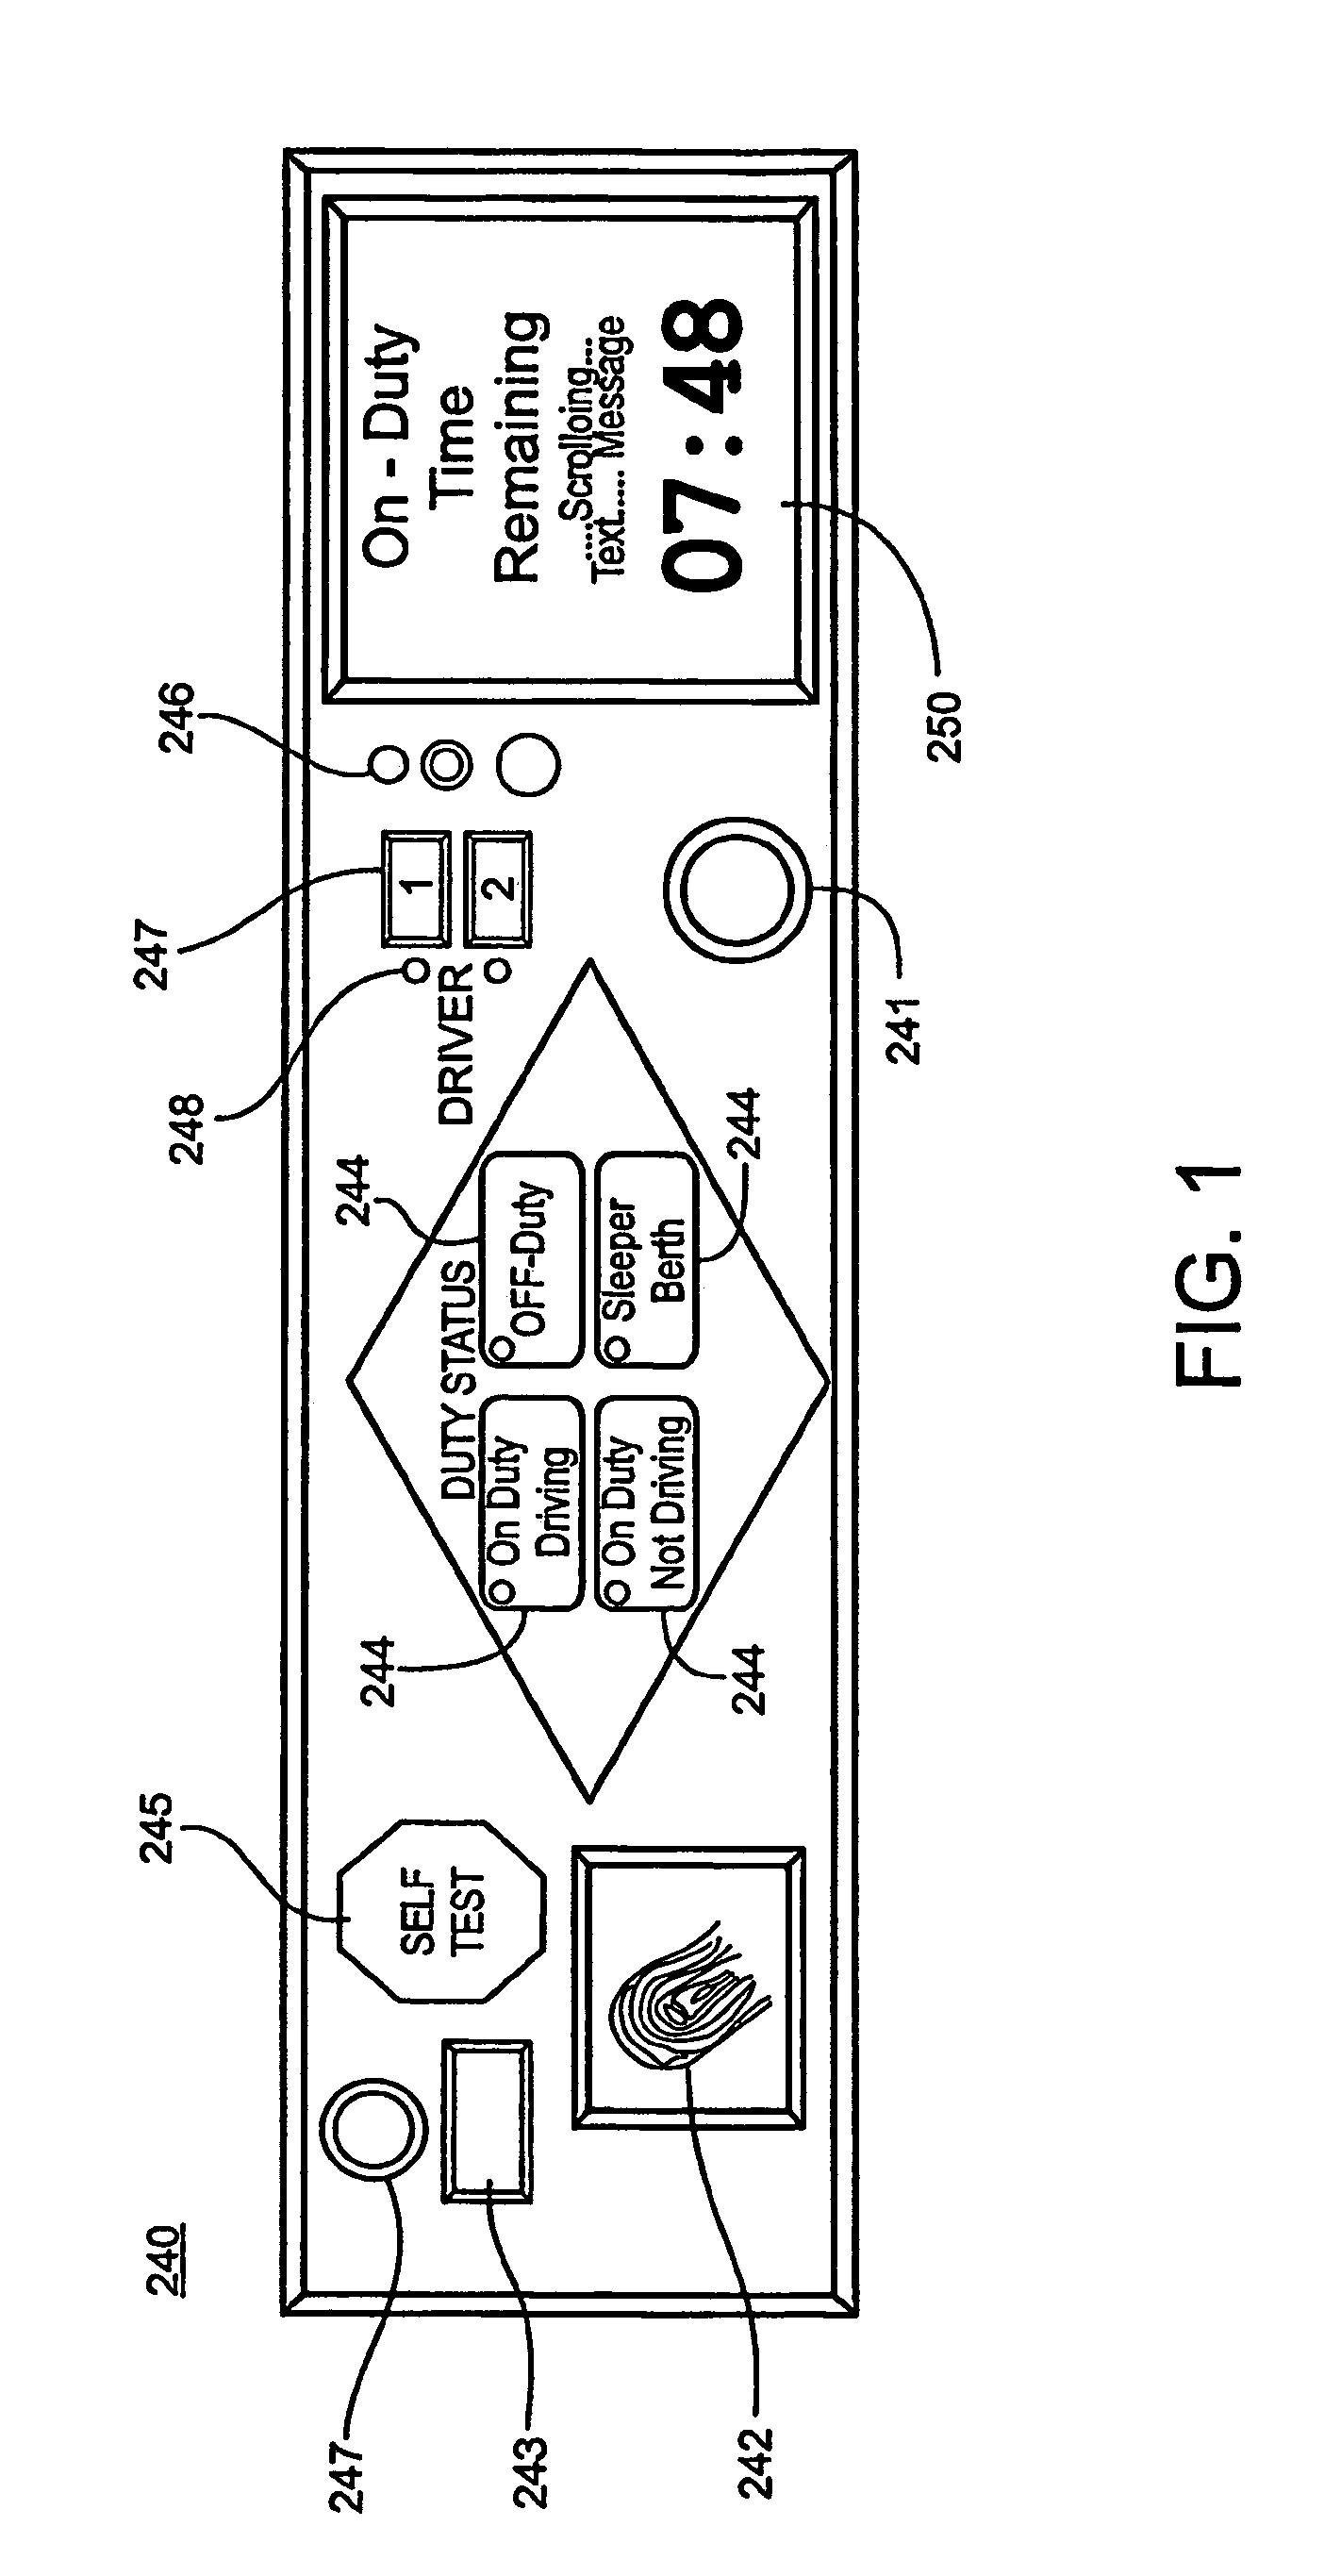 Driver activity and vehicle operation logging and reporting